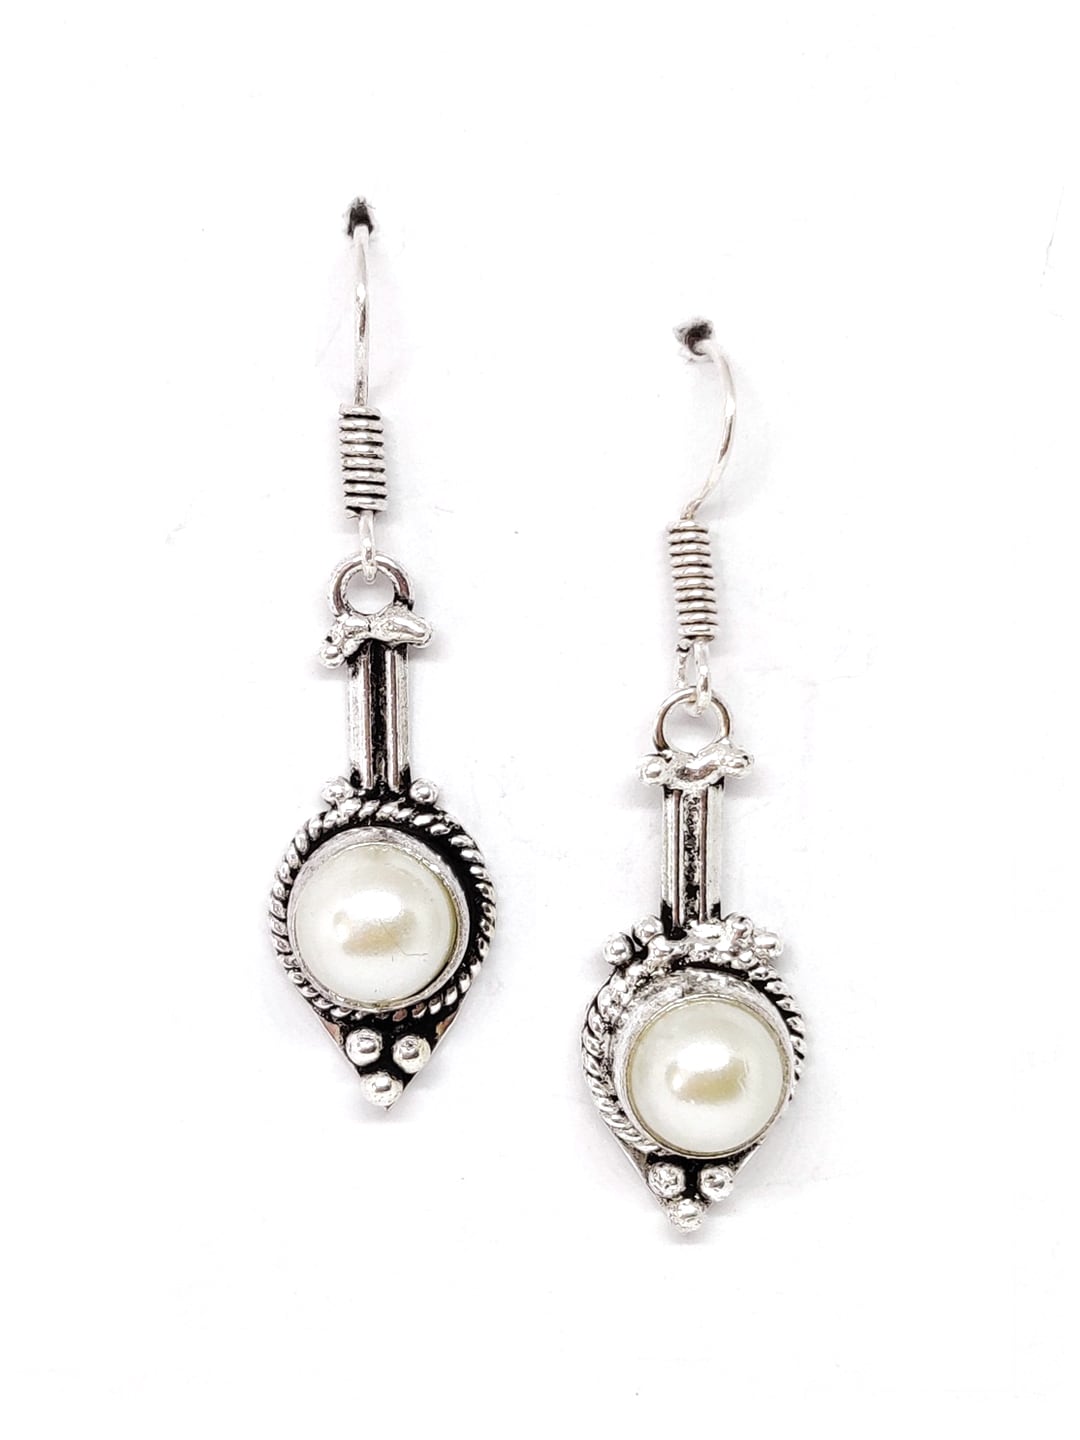 EL REGALO Silver-Toned & White German Silver Contemporary Drop Earrings - for Women and Girls
Style ID: 16770294